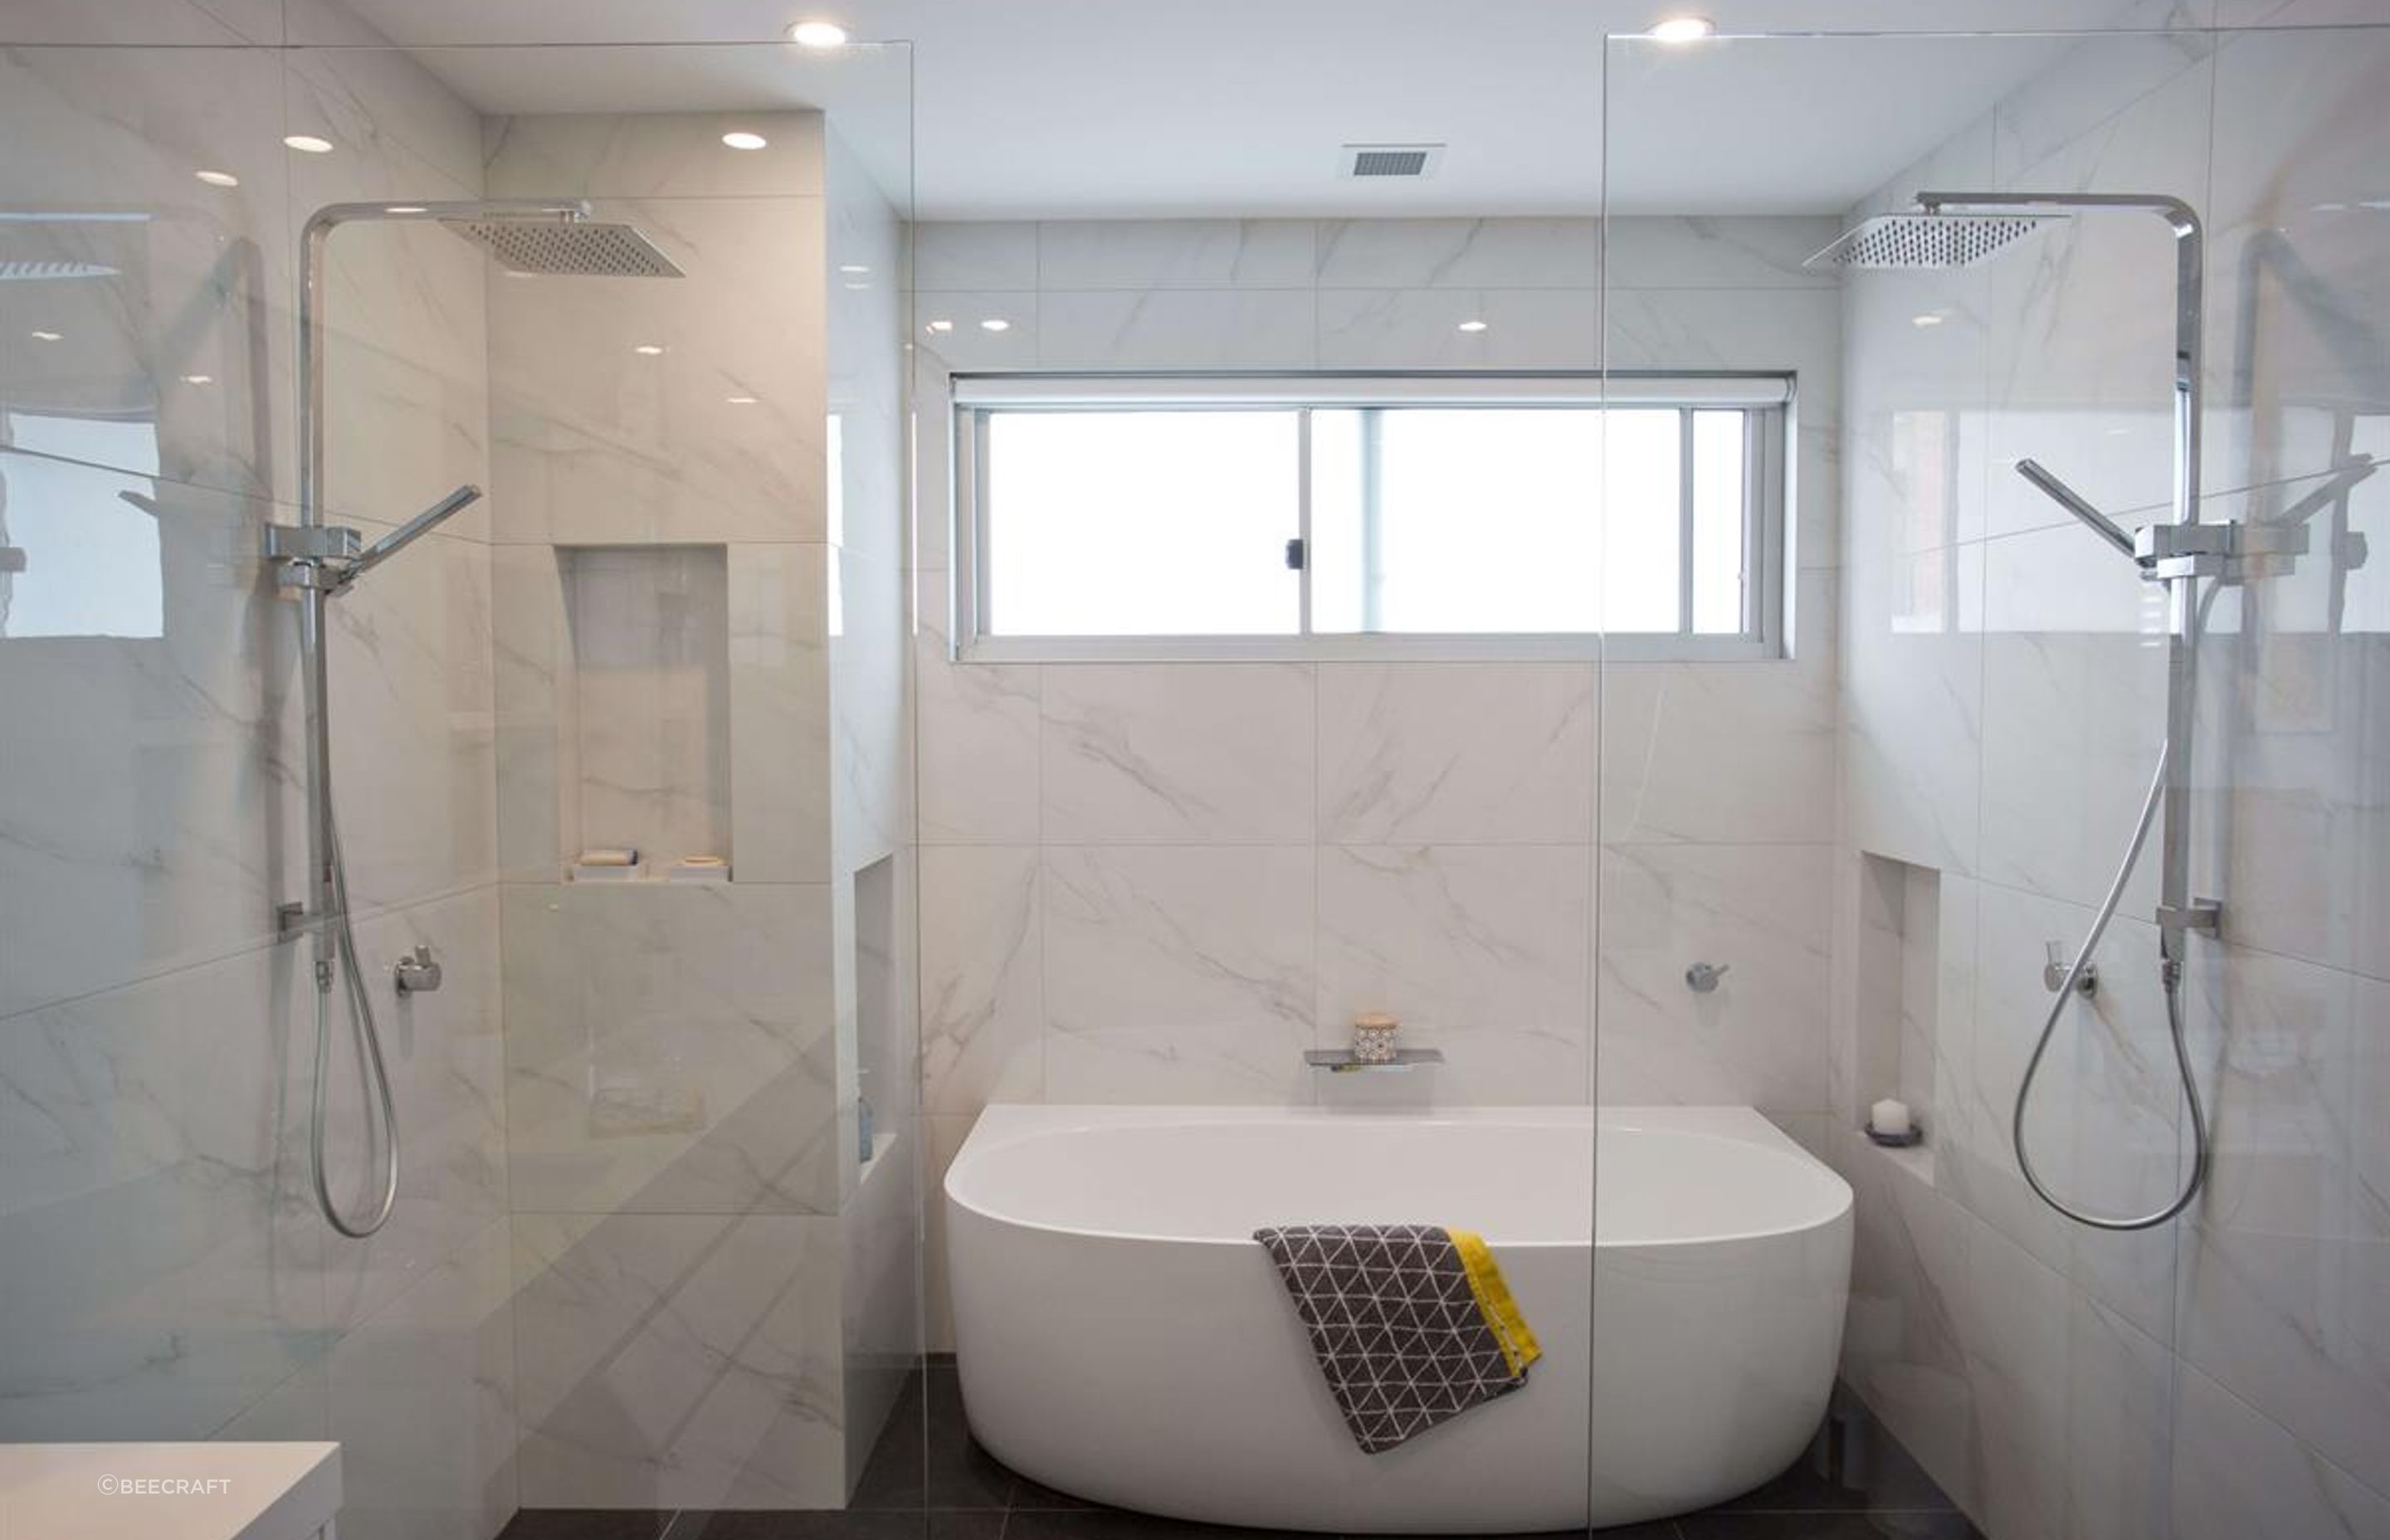 Glass shower screens feature at a first floor addition at Dee Why - Photography: Lachlan Carey